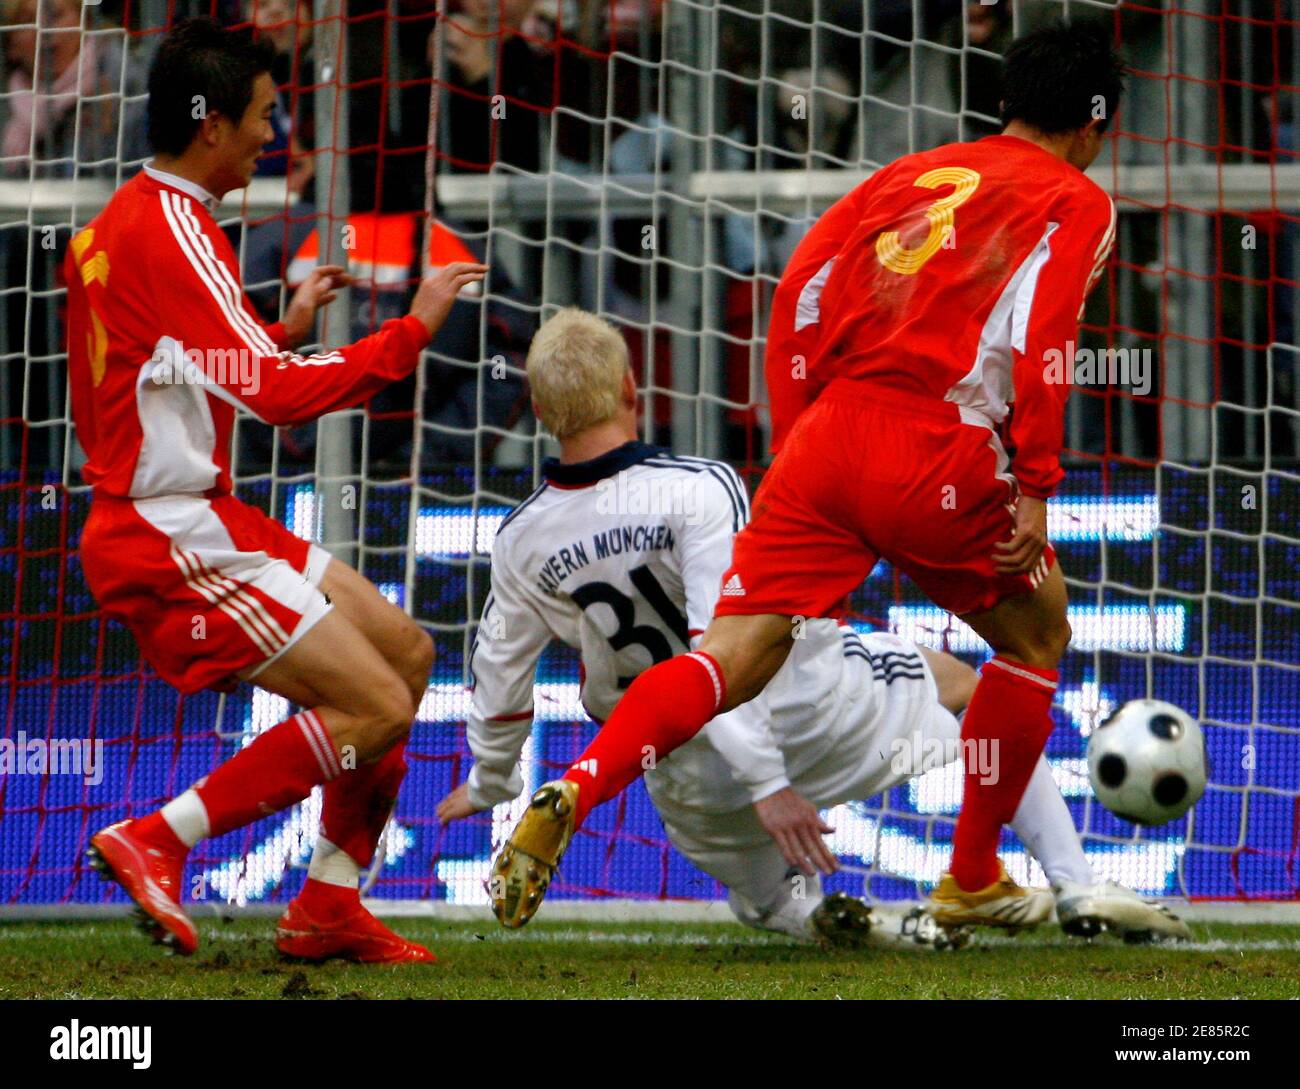 Bayern Munich's Bastian Schweinsteiger (C) scores his first goal against Xiang Sun (R) and Lin Dai of the Chinese Olympic team during their friendly soccer match in Munich, January 12, 2008.   REUTERS/Alexandra Beier (GERMANY) Stock Photo